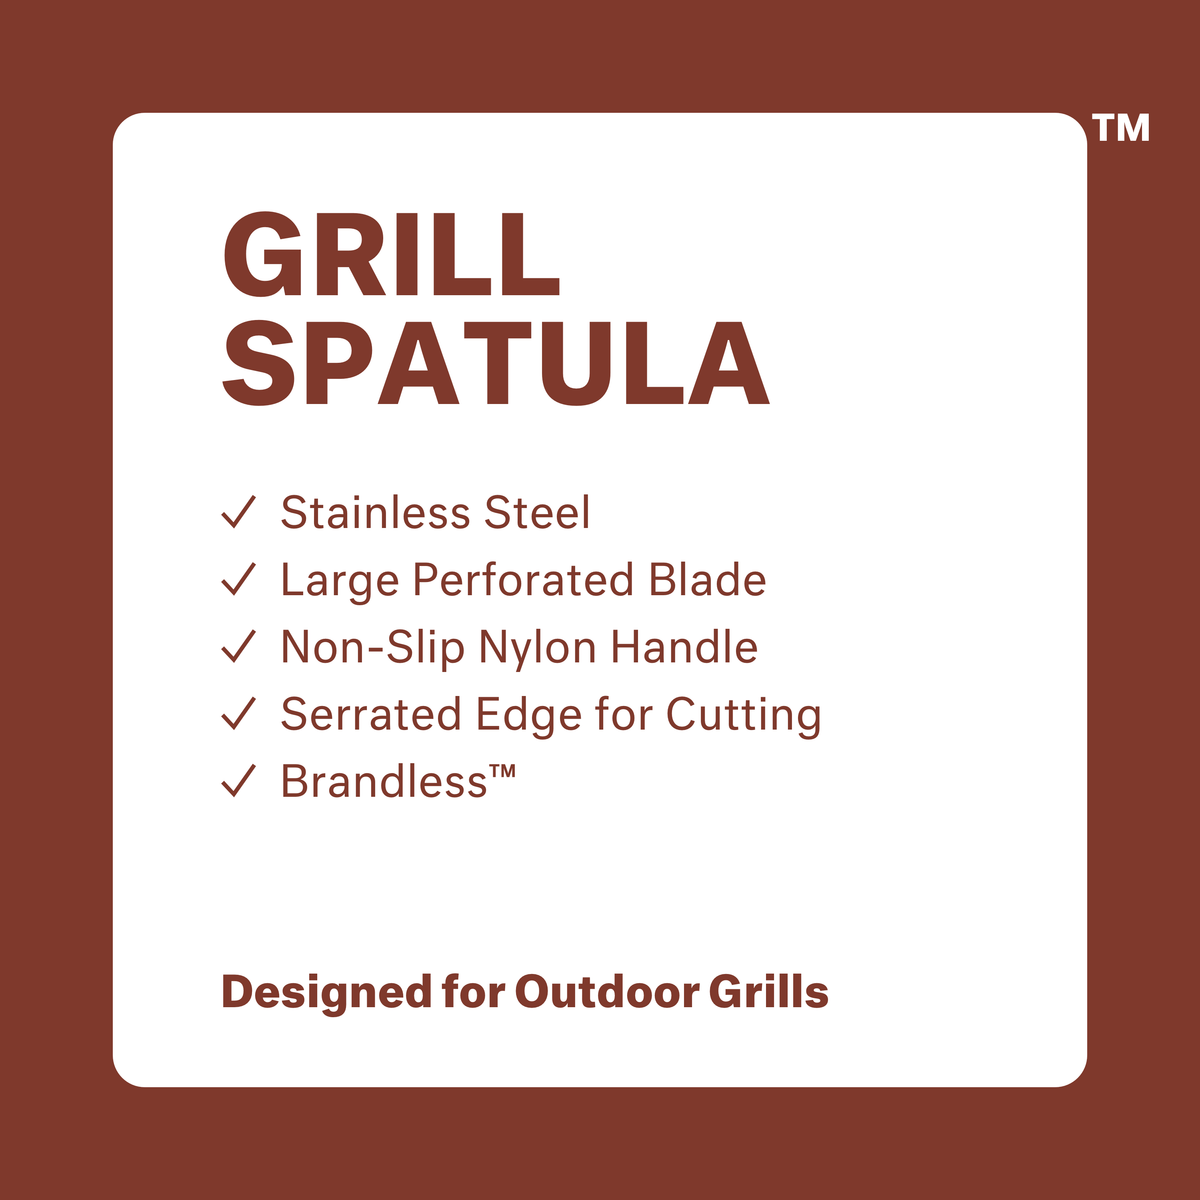 Grill spatula. Stainless steel. Large perforated blade. Non-slip nylon handle. Serrated edge for cutting. Brandless. Designed for outdoor grills.